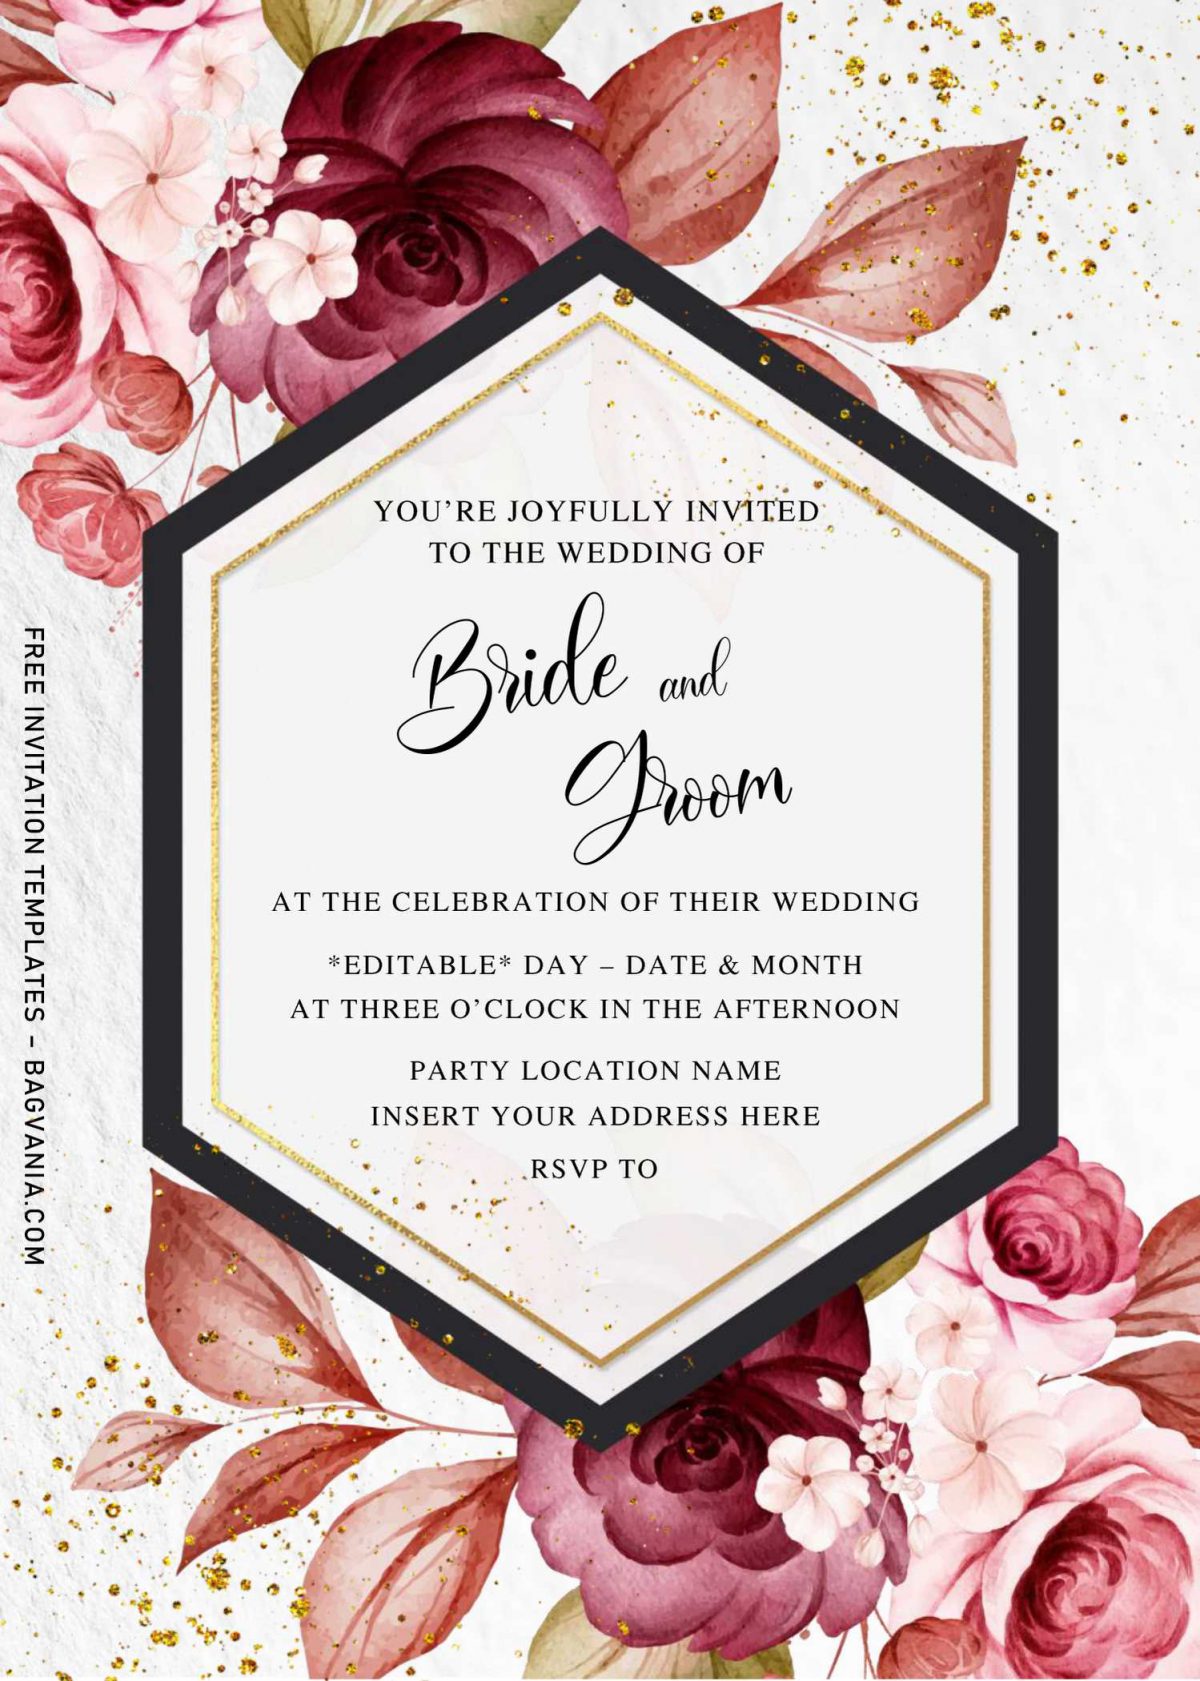 Free Burgundy Floral Wedding Invitation Templates For Word | FREE